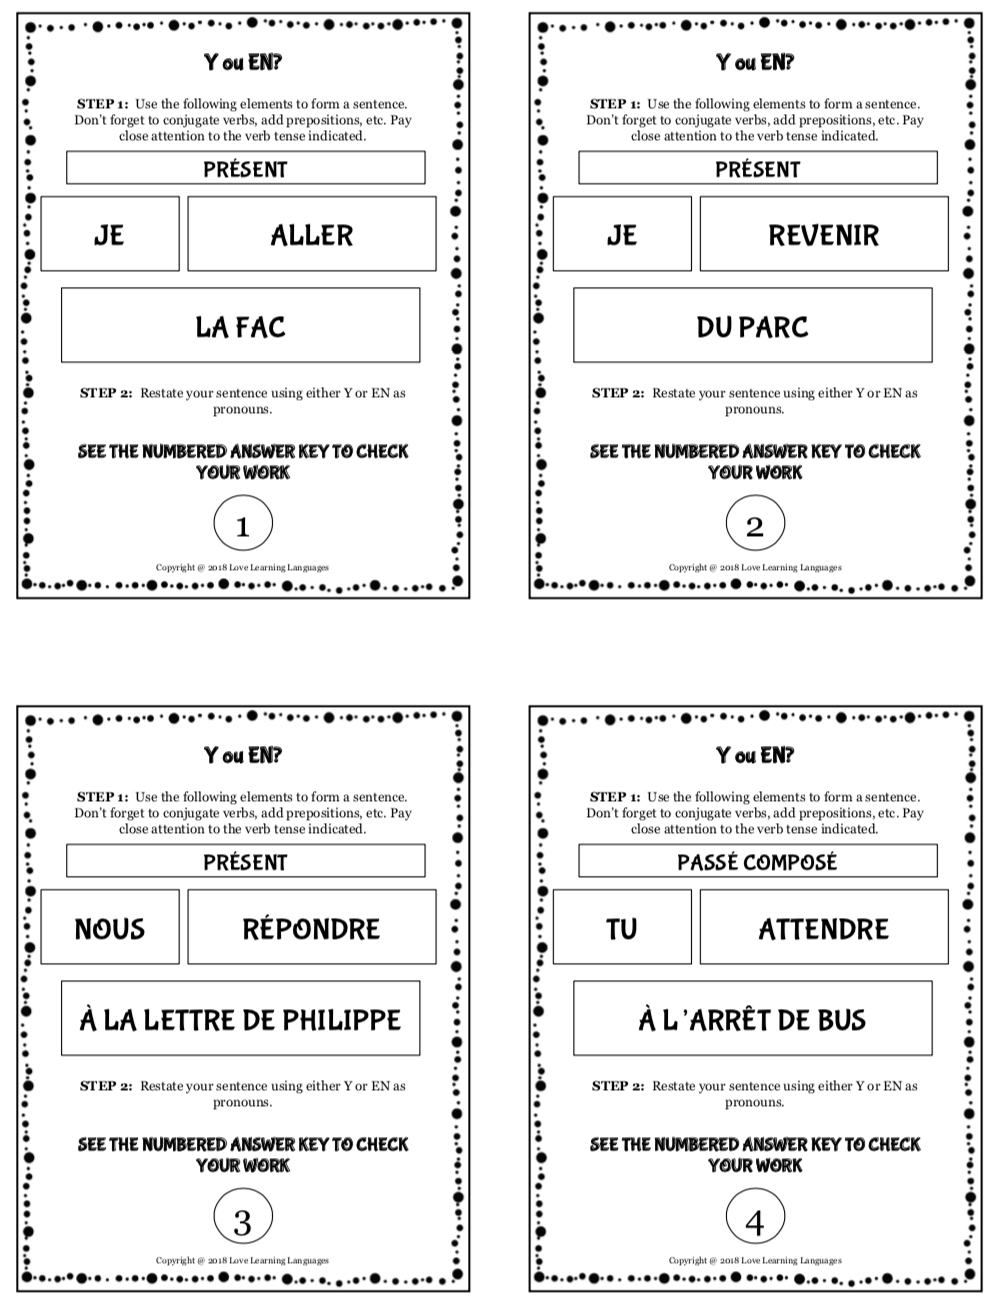 french-pronouns-y-and-en-love-learning-languages-french-academy